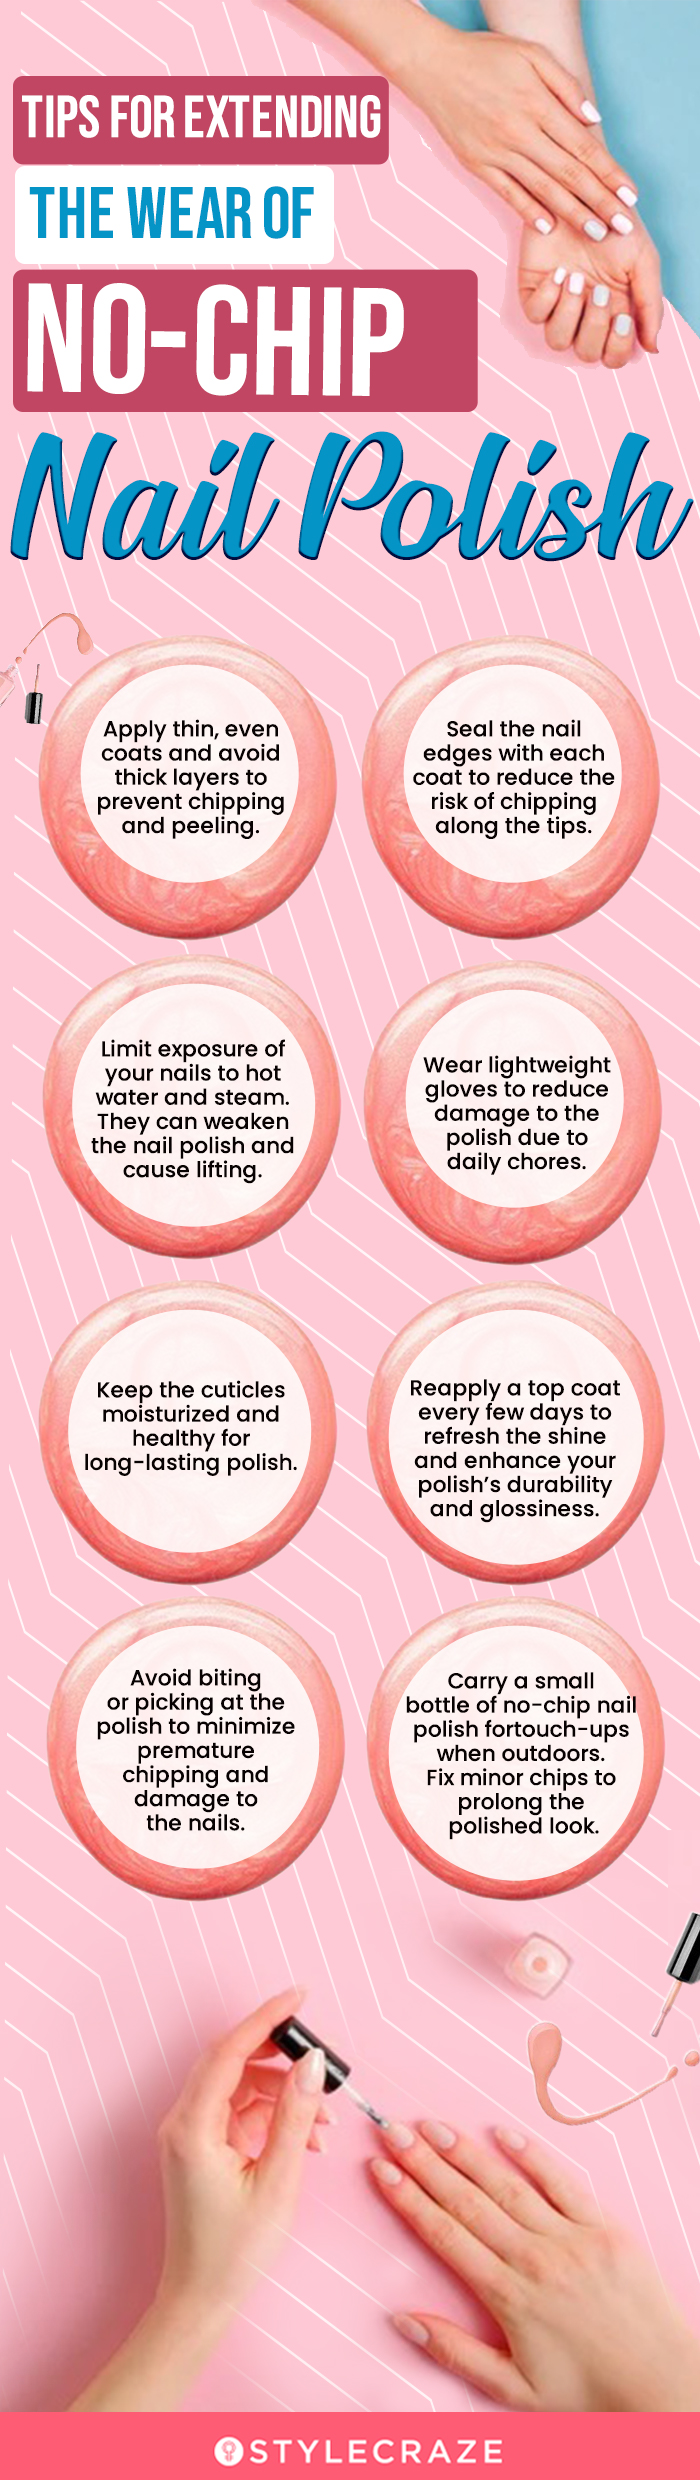 Tips For Extending The Wear Of No-Chip Nail Polish (infographic)